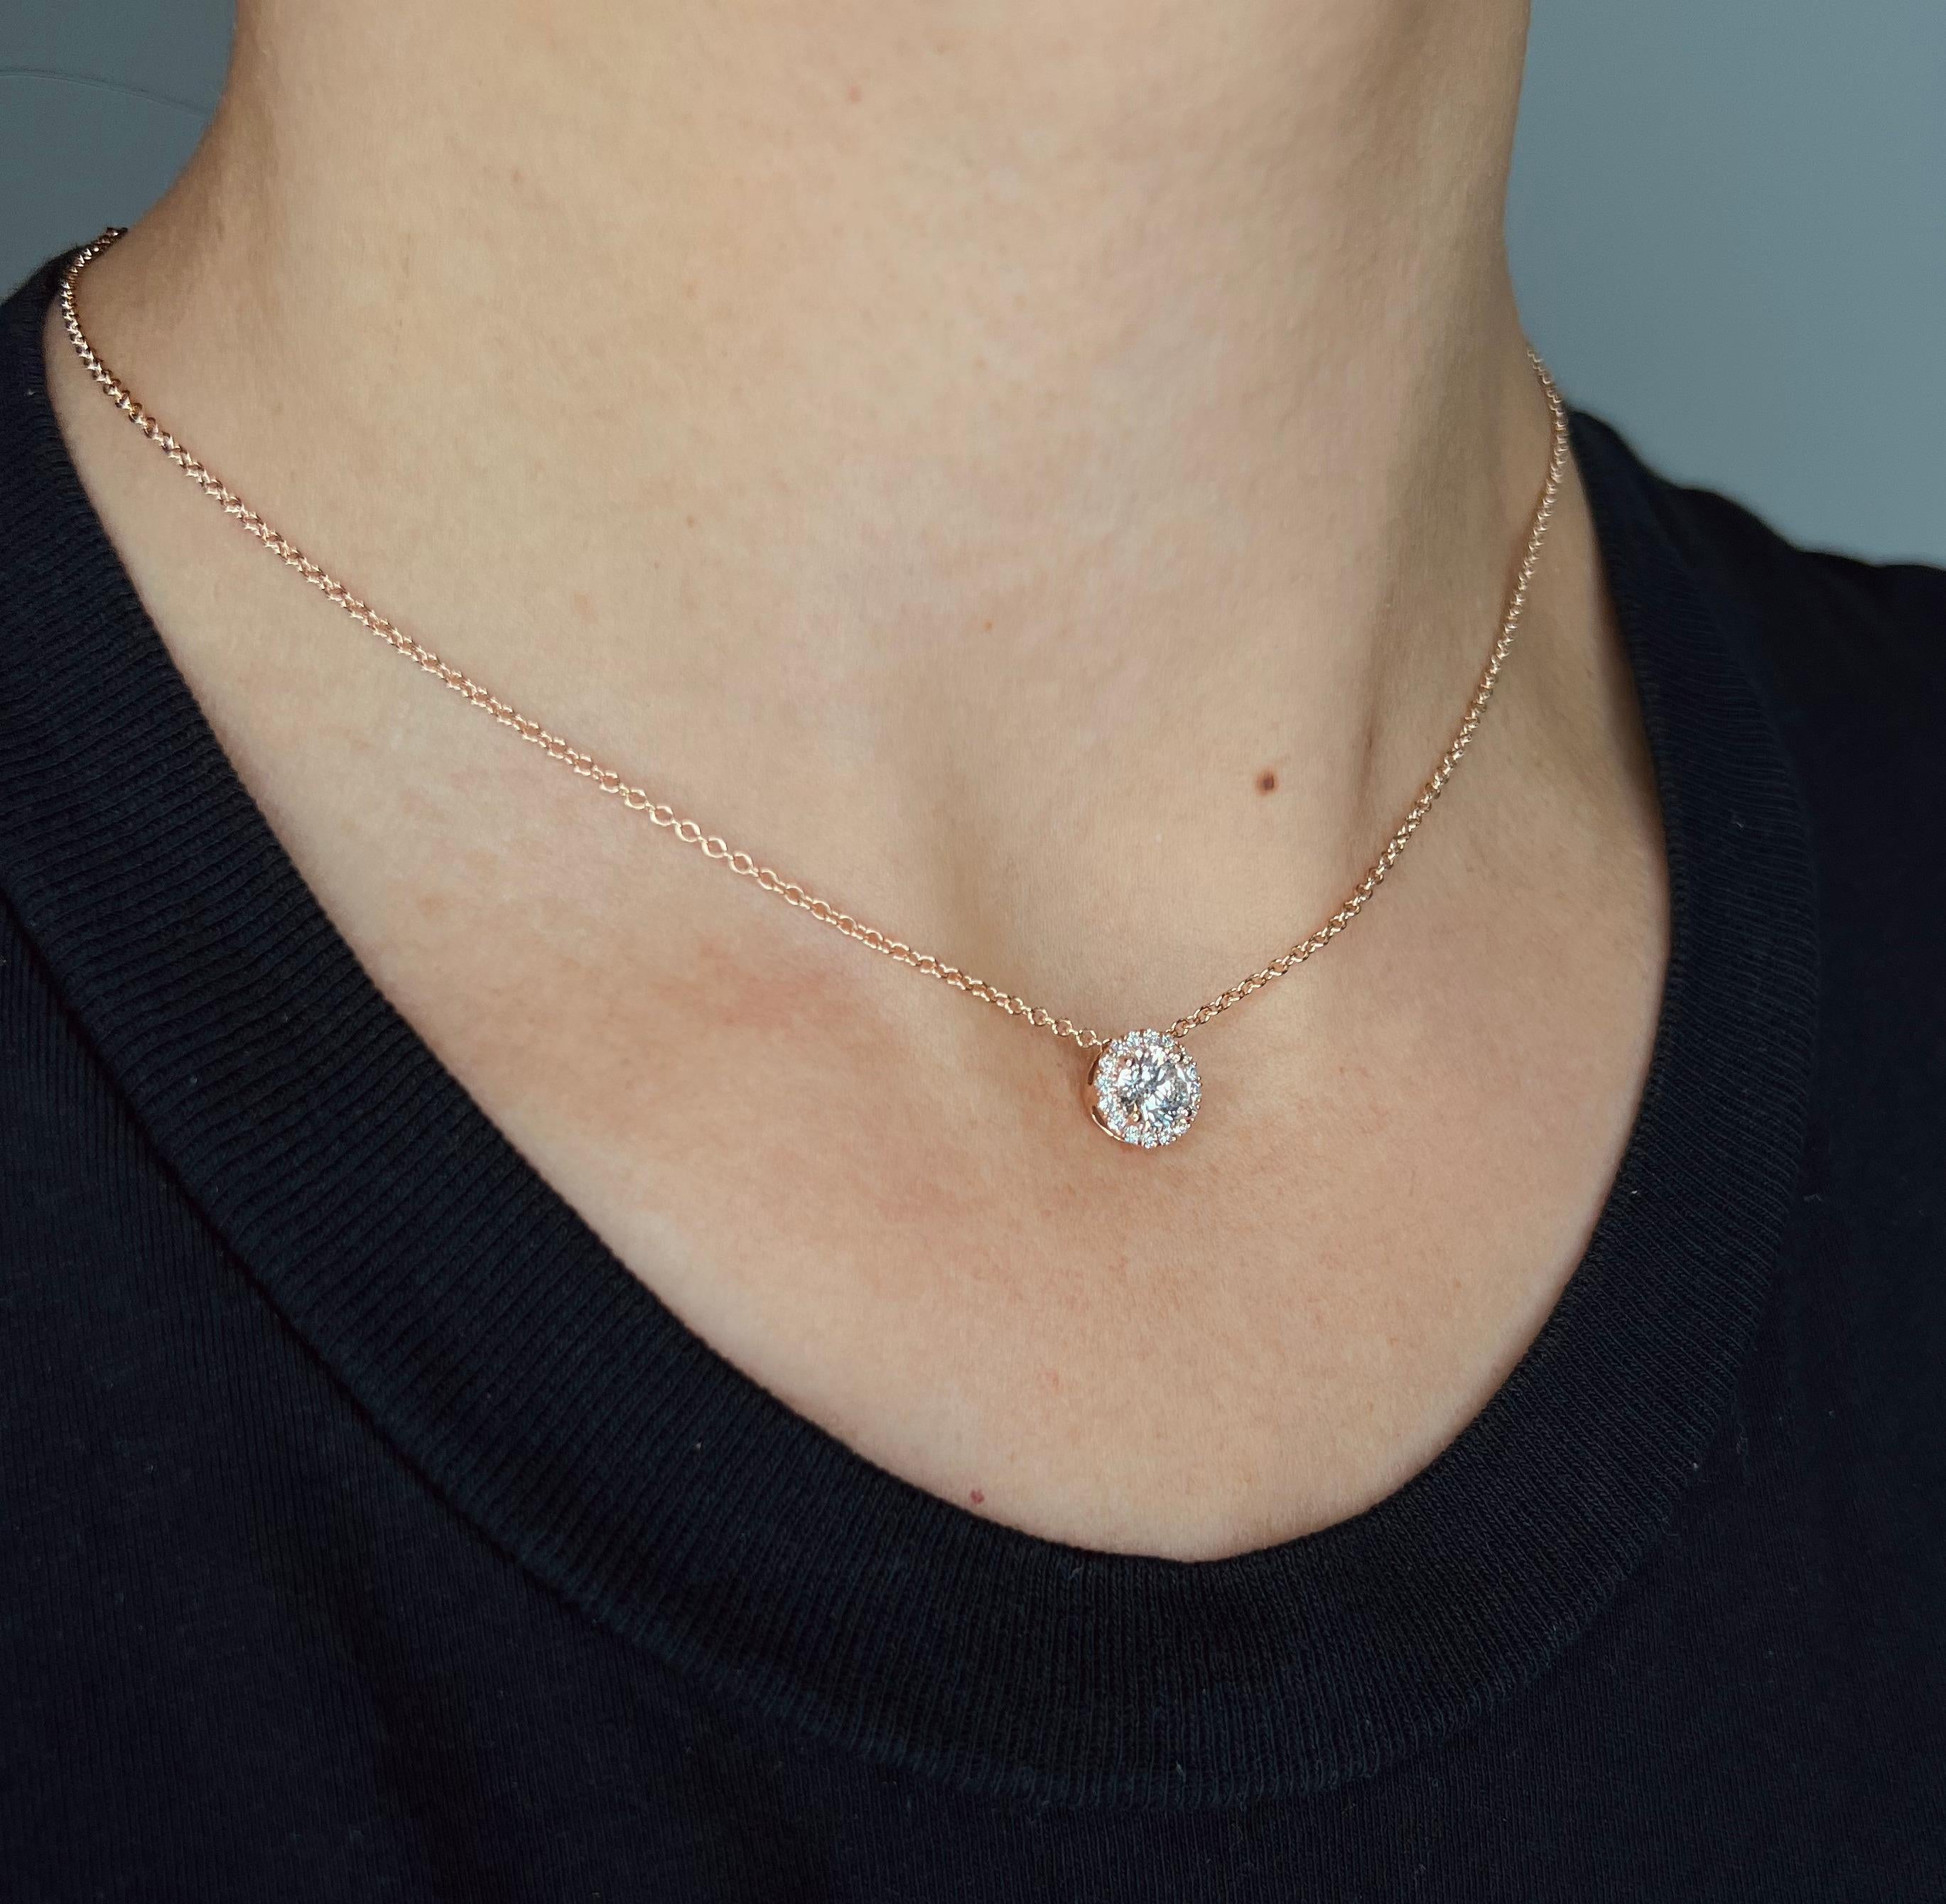 This diamond circle pendant provides a glowing chic look.
Metal: 14k Gold
Diamond Total Carats (Includes 0.15ct halo): 1.15ct (1.00ct Center)
Diamond Cut: Round Natural Diamonds (Not Lab Grown)
Diamond Clarity: VS
Diamond Color: F-G
Color: White